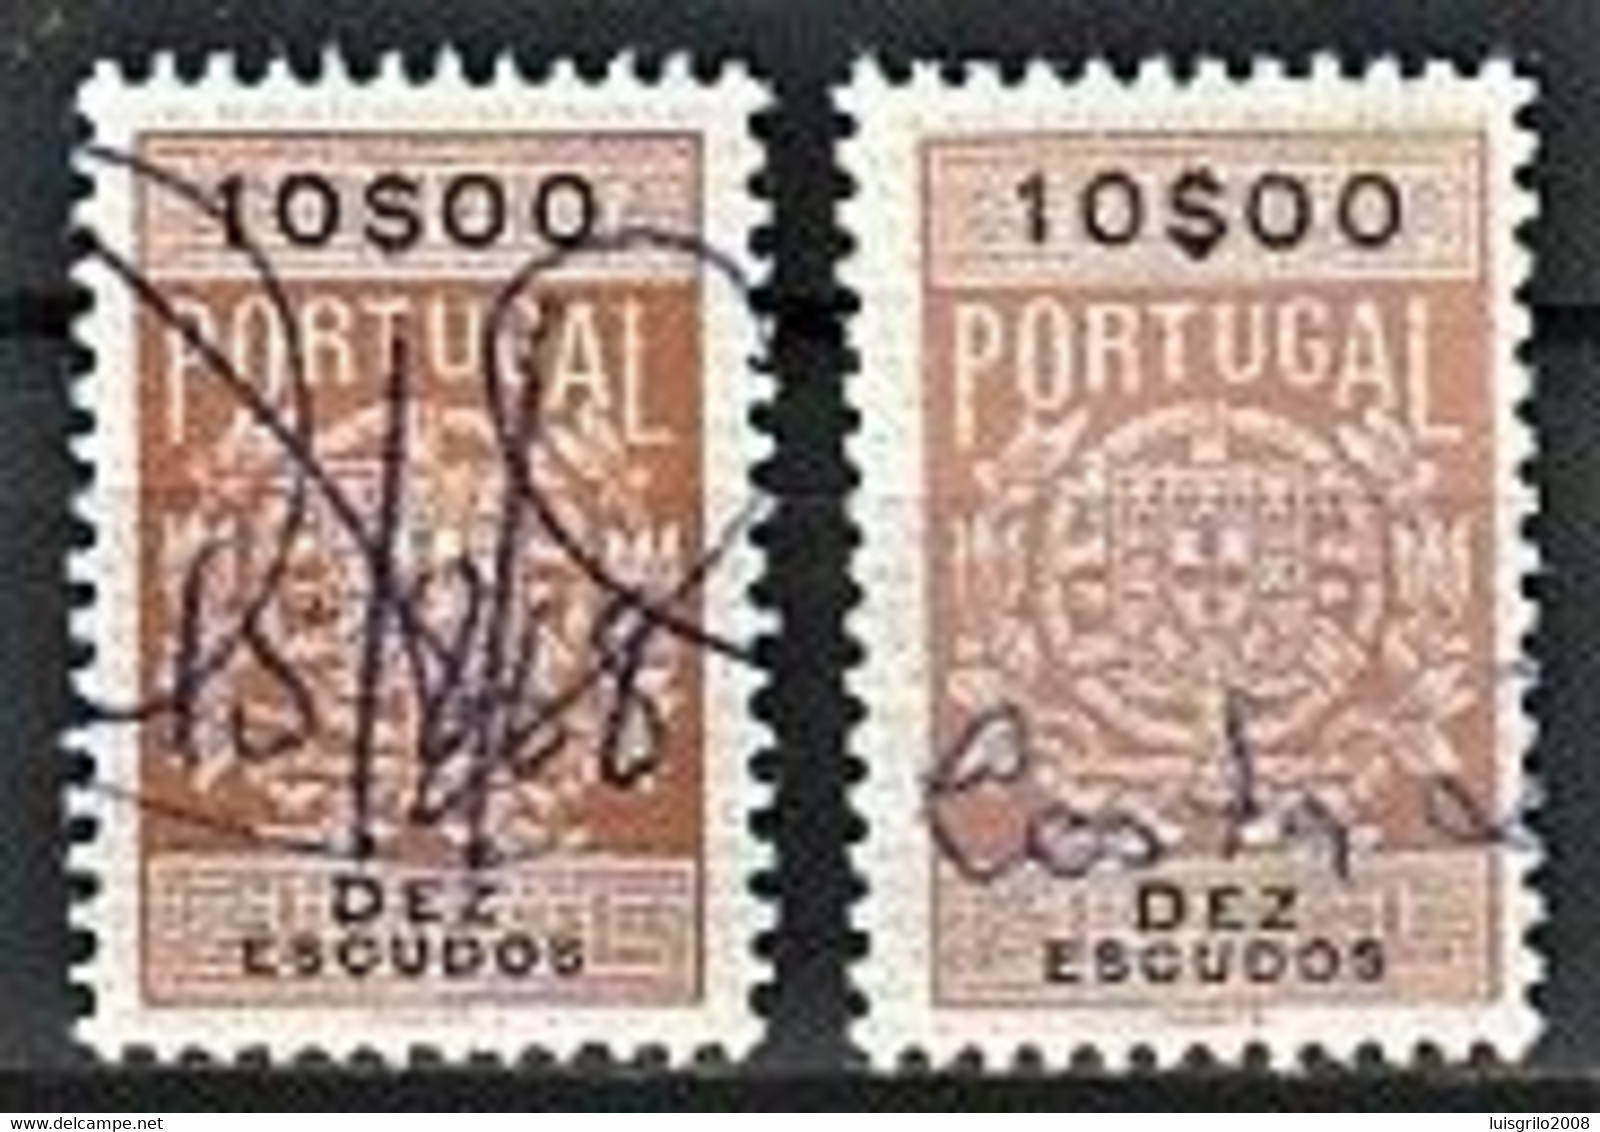 Fiscal/ Revenue, Portugal 1940 - Estampilha Fiscal -|- 10$00 - COLOR VARIANT - Is The Stamp Of The Right - Usado